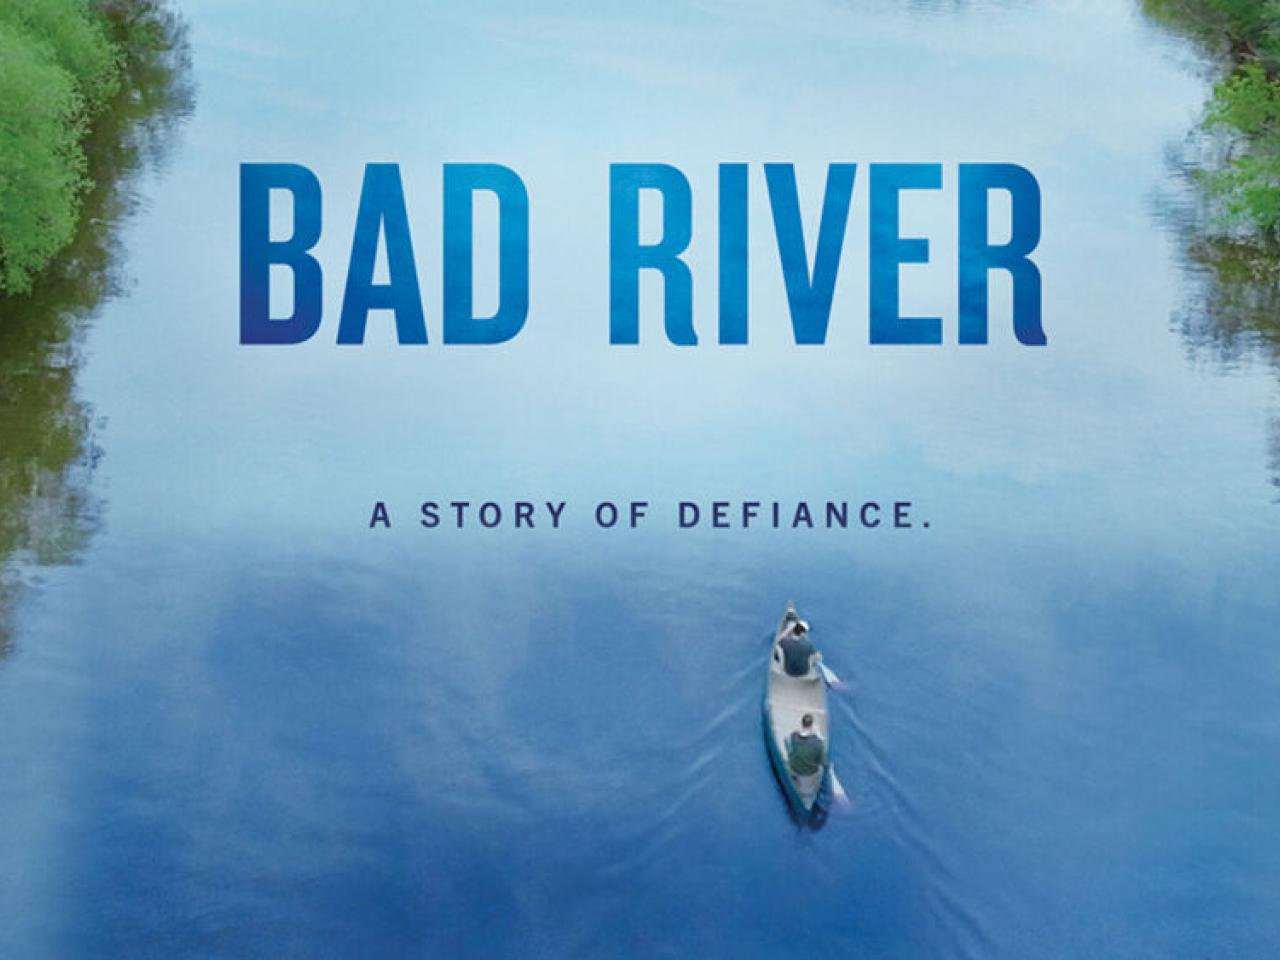 Two people in a canoe on a tree-lined river. "Bad River. A story of defiance."